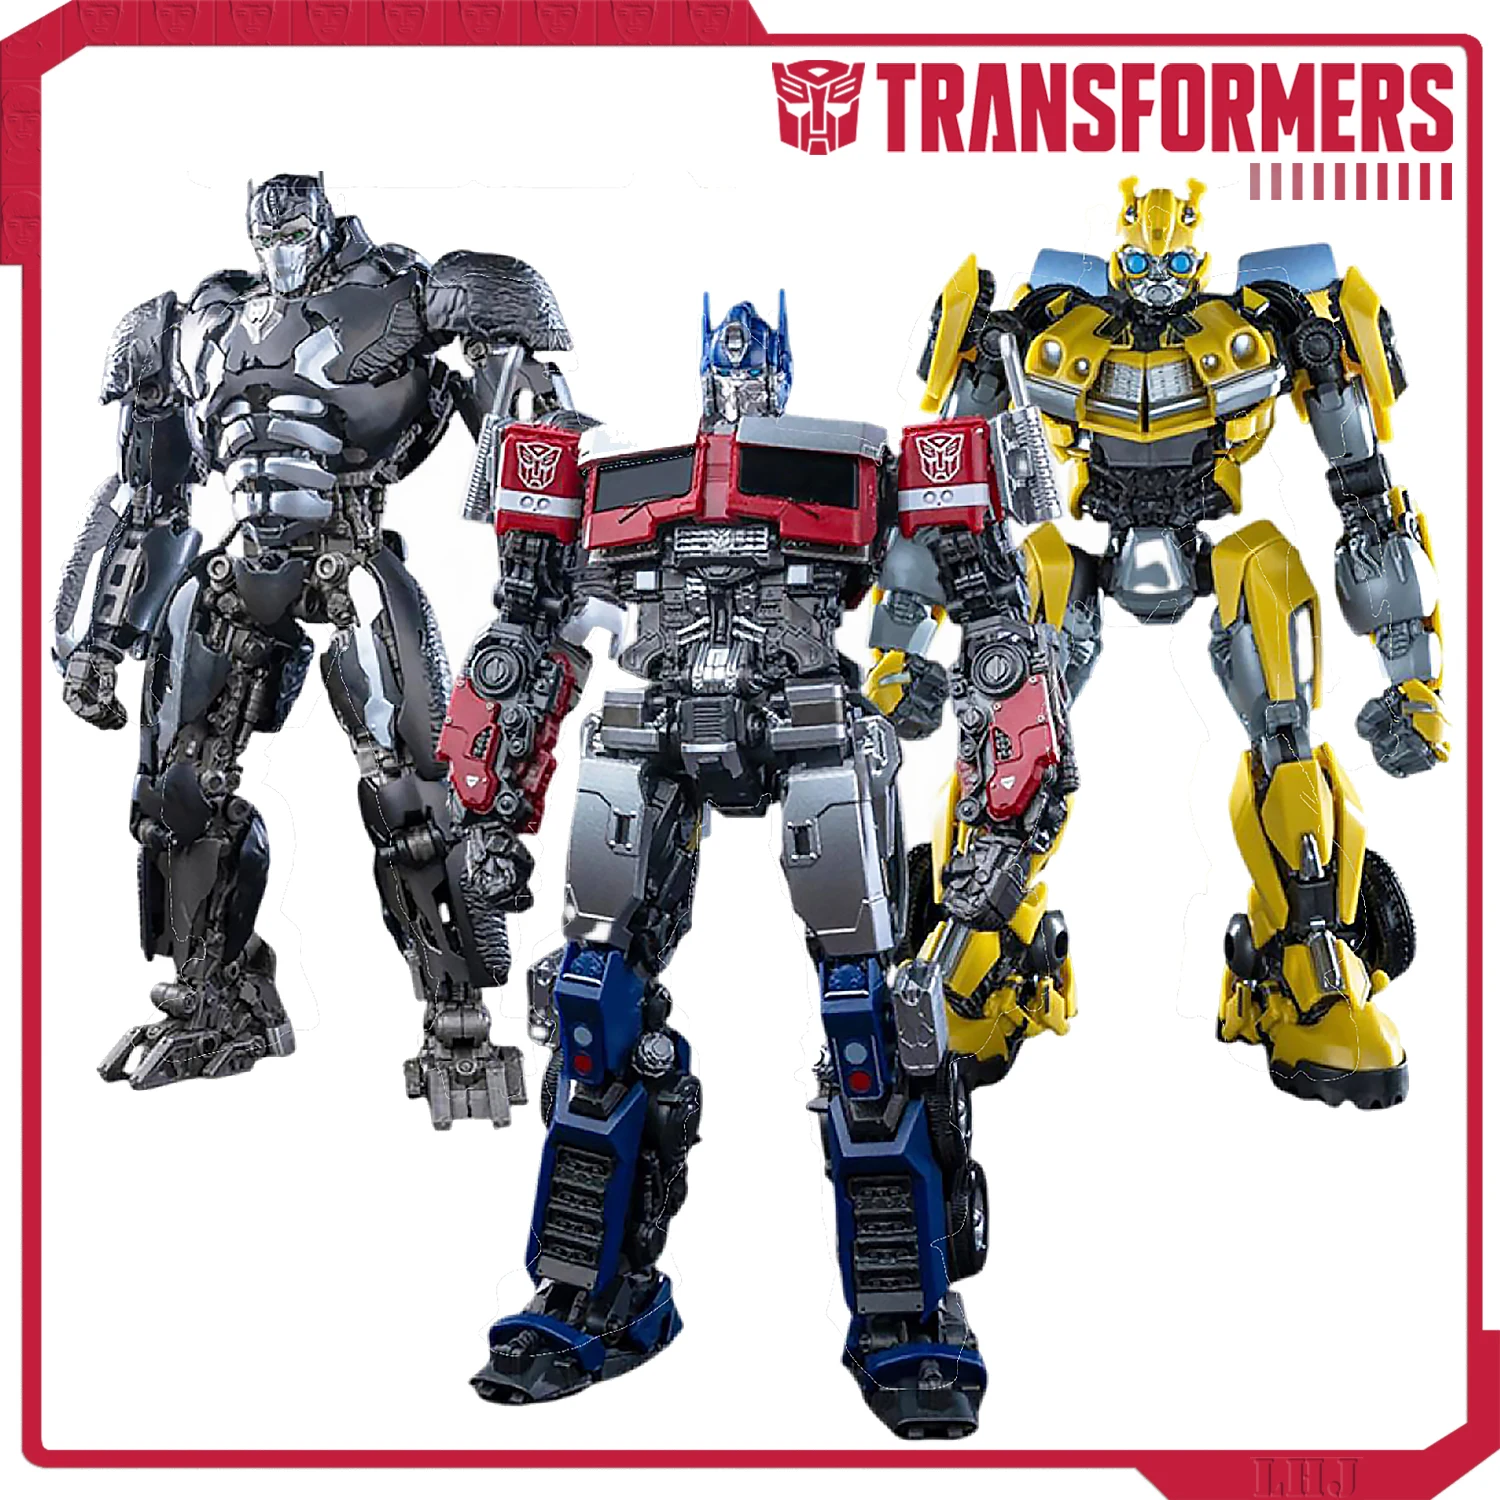 

TAKARA TOMY Transformers Yolopark Rise of The Beasts Optimus Primal Bumblebee Optimus Prime Anime Figure Action Model Toys Gift